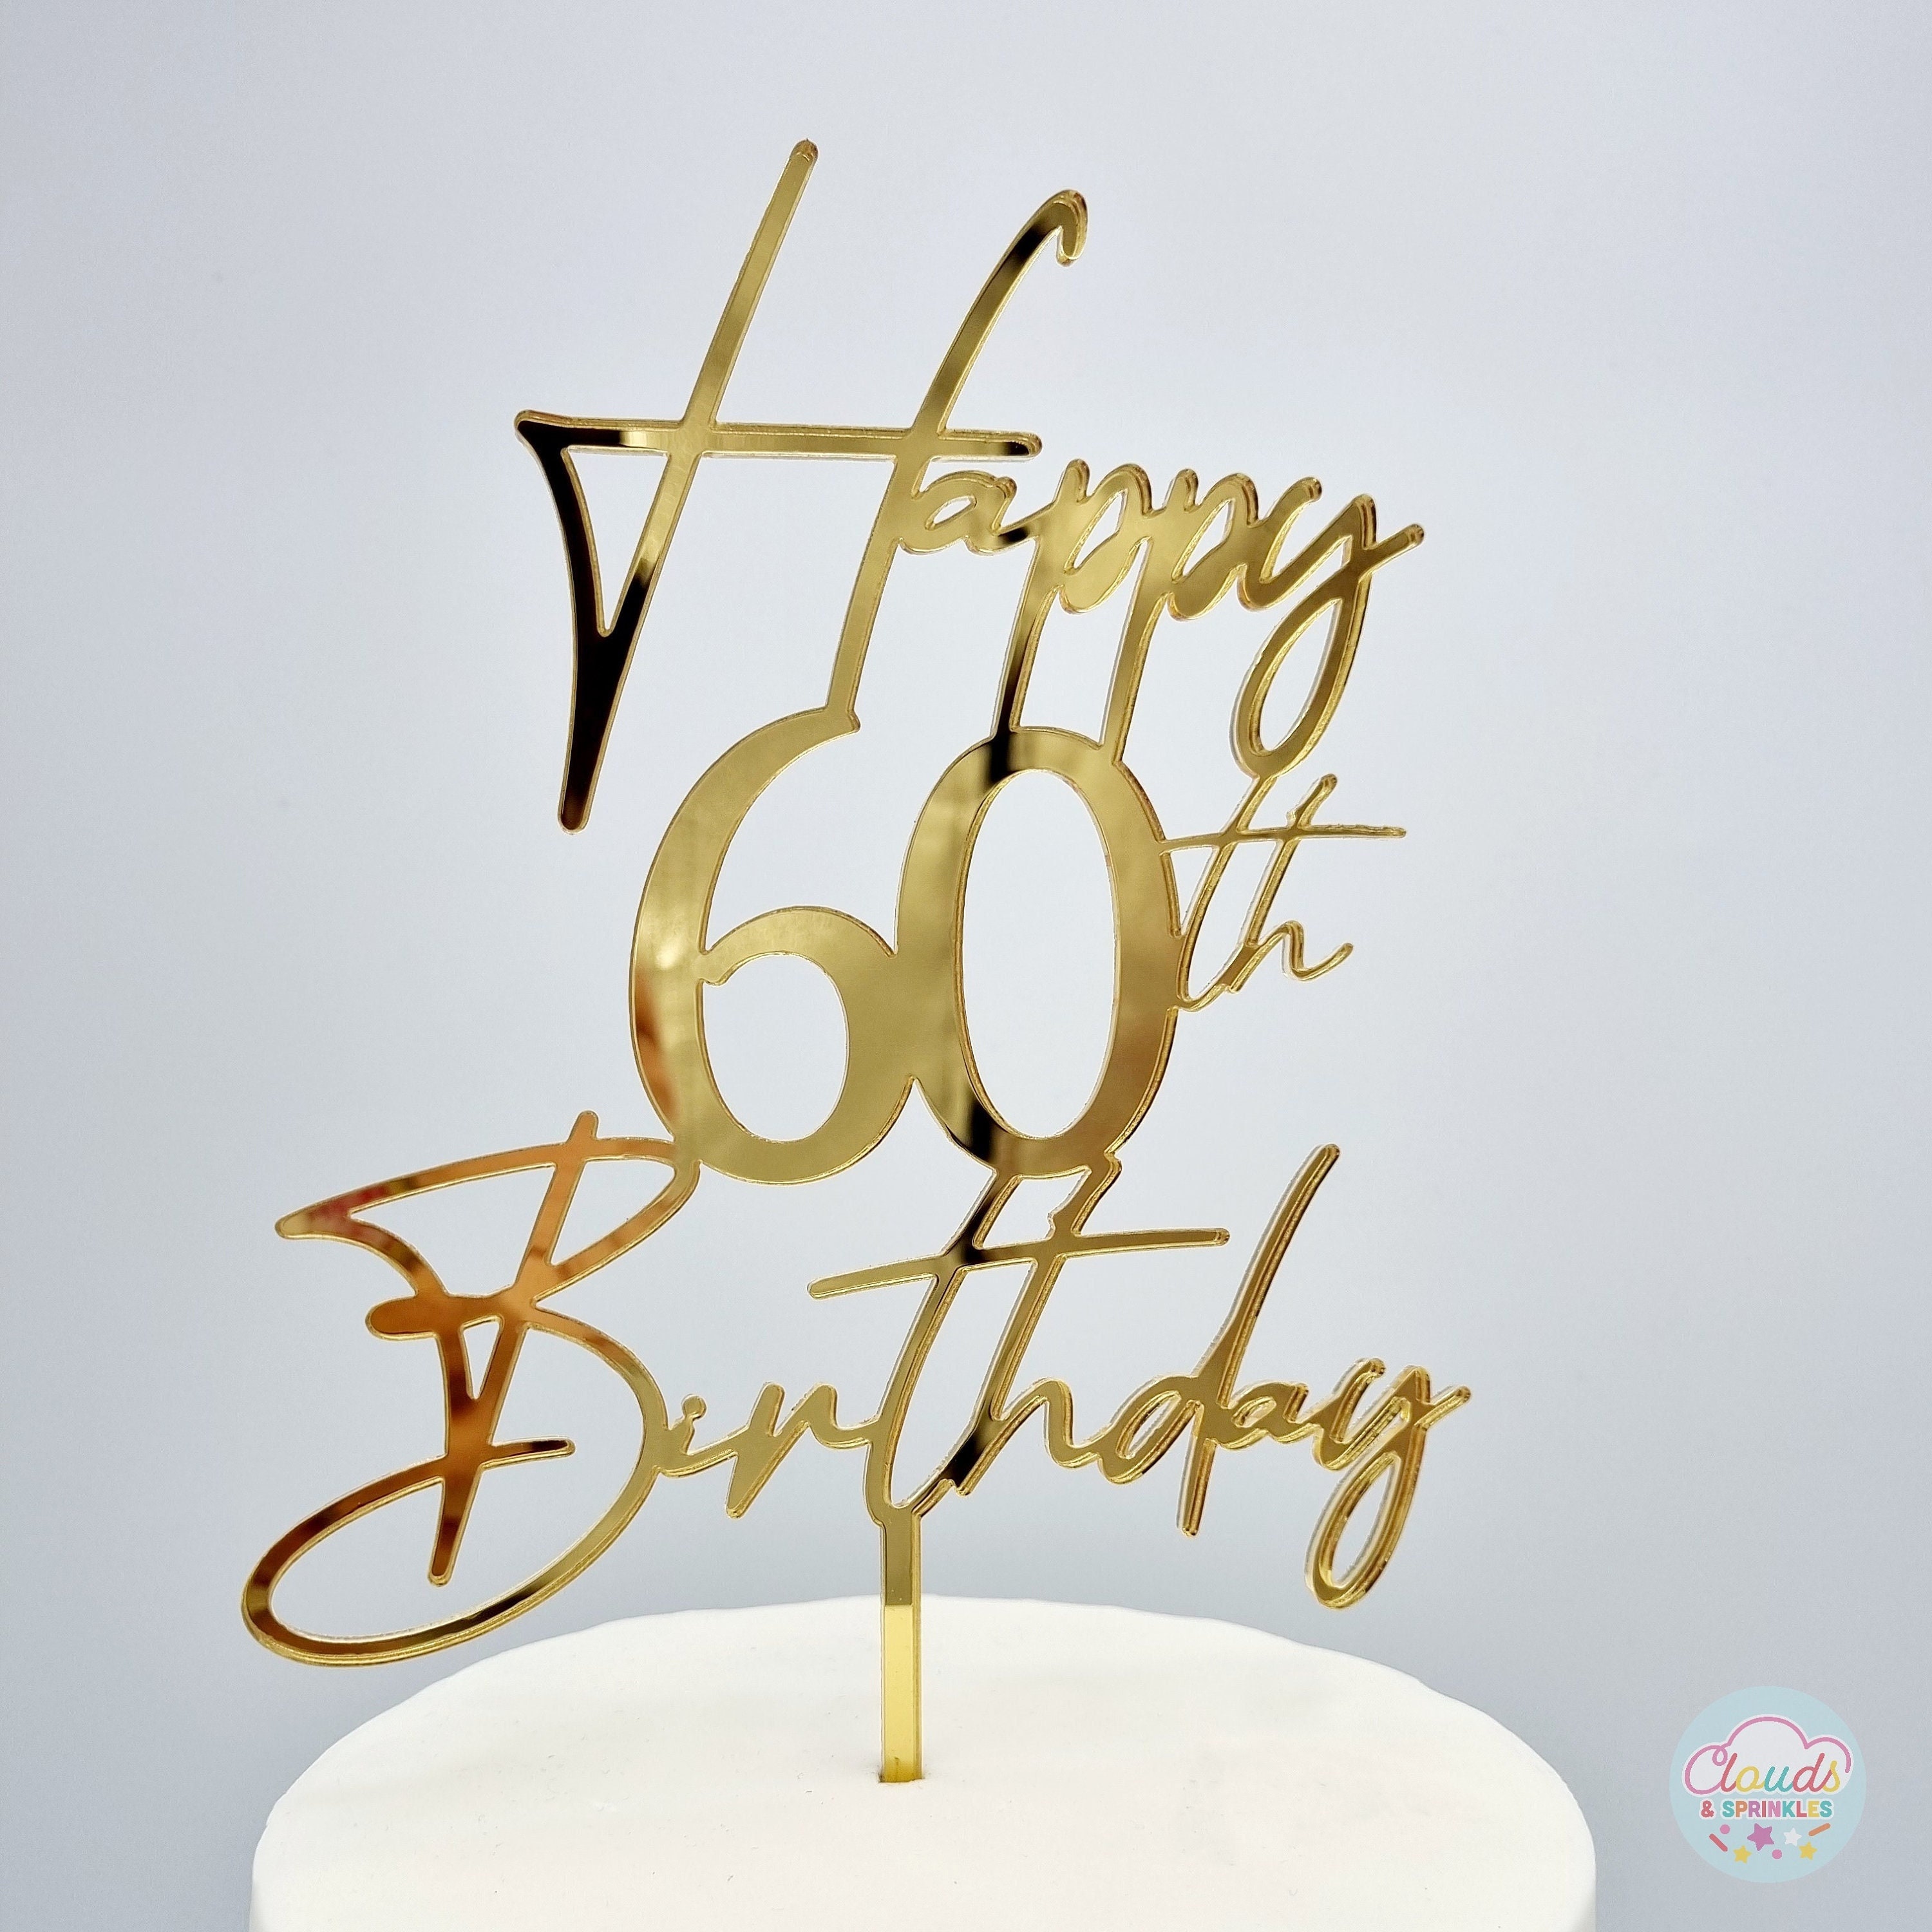 Gold Glitter 18th Birthday Cake Topper, Gold Birthday Cake Topper, Gold  Cake Decorations, Gold Glitter Party Cake Topper 